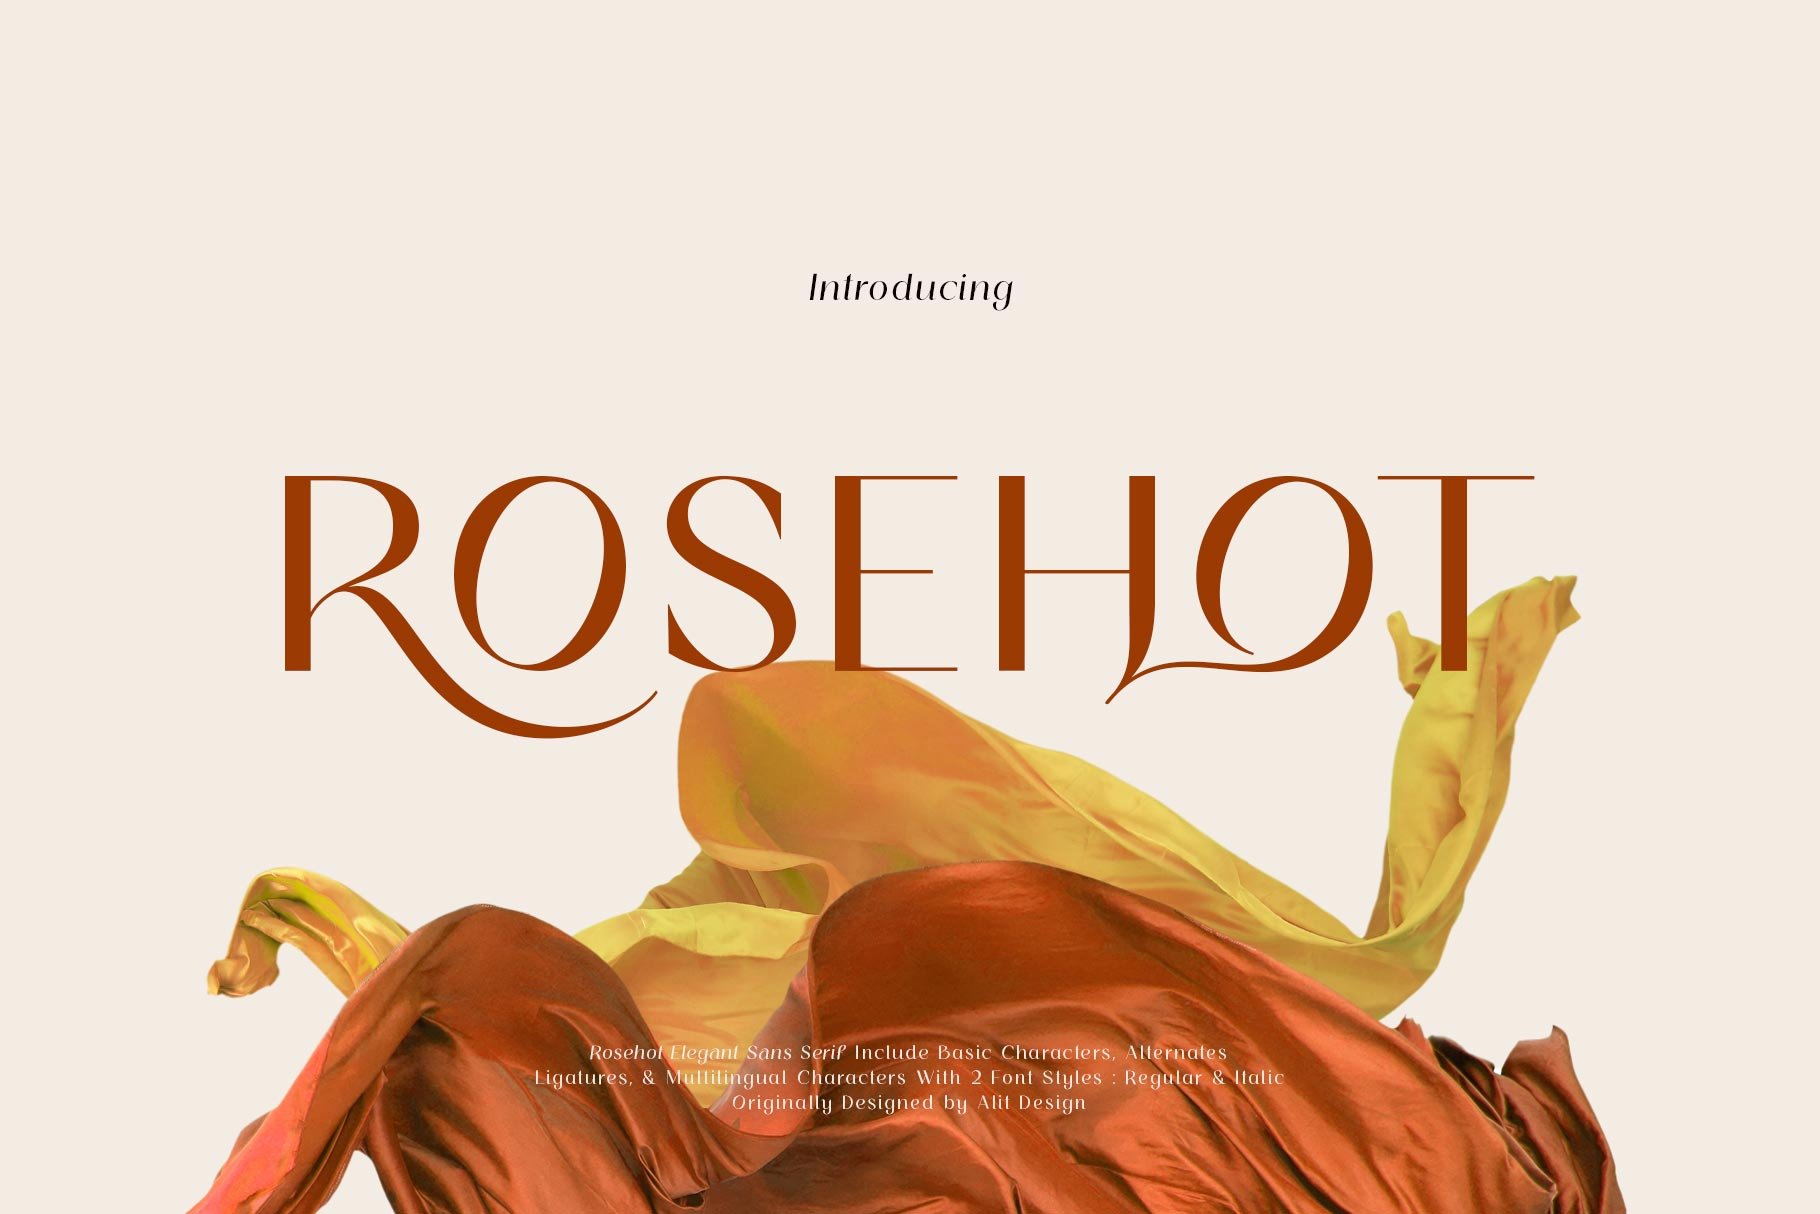 Rosehot Typeface cover image.